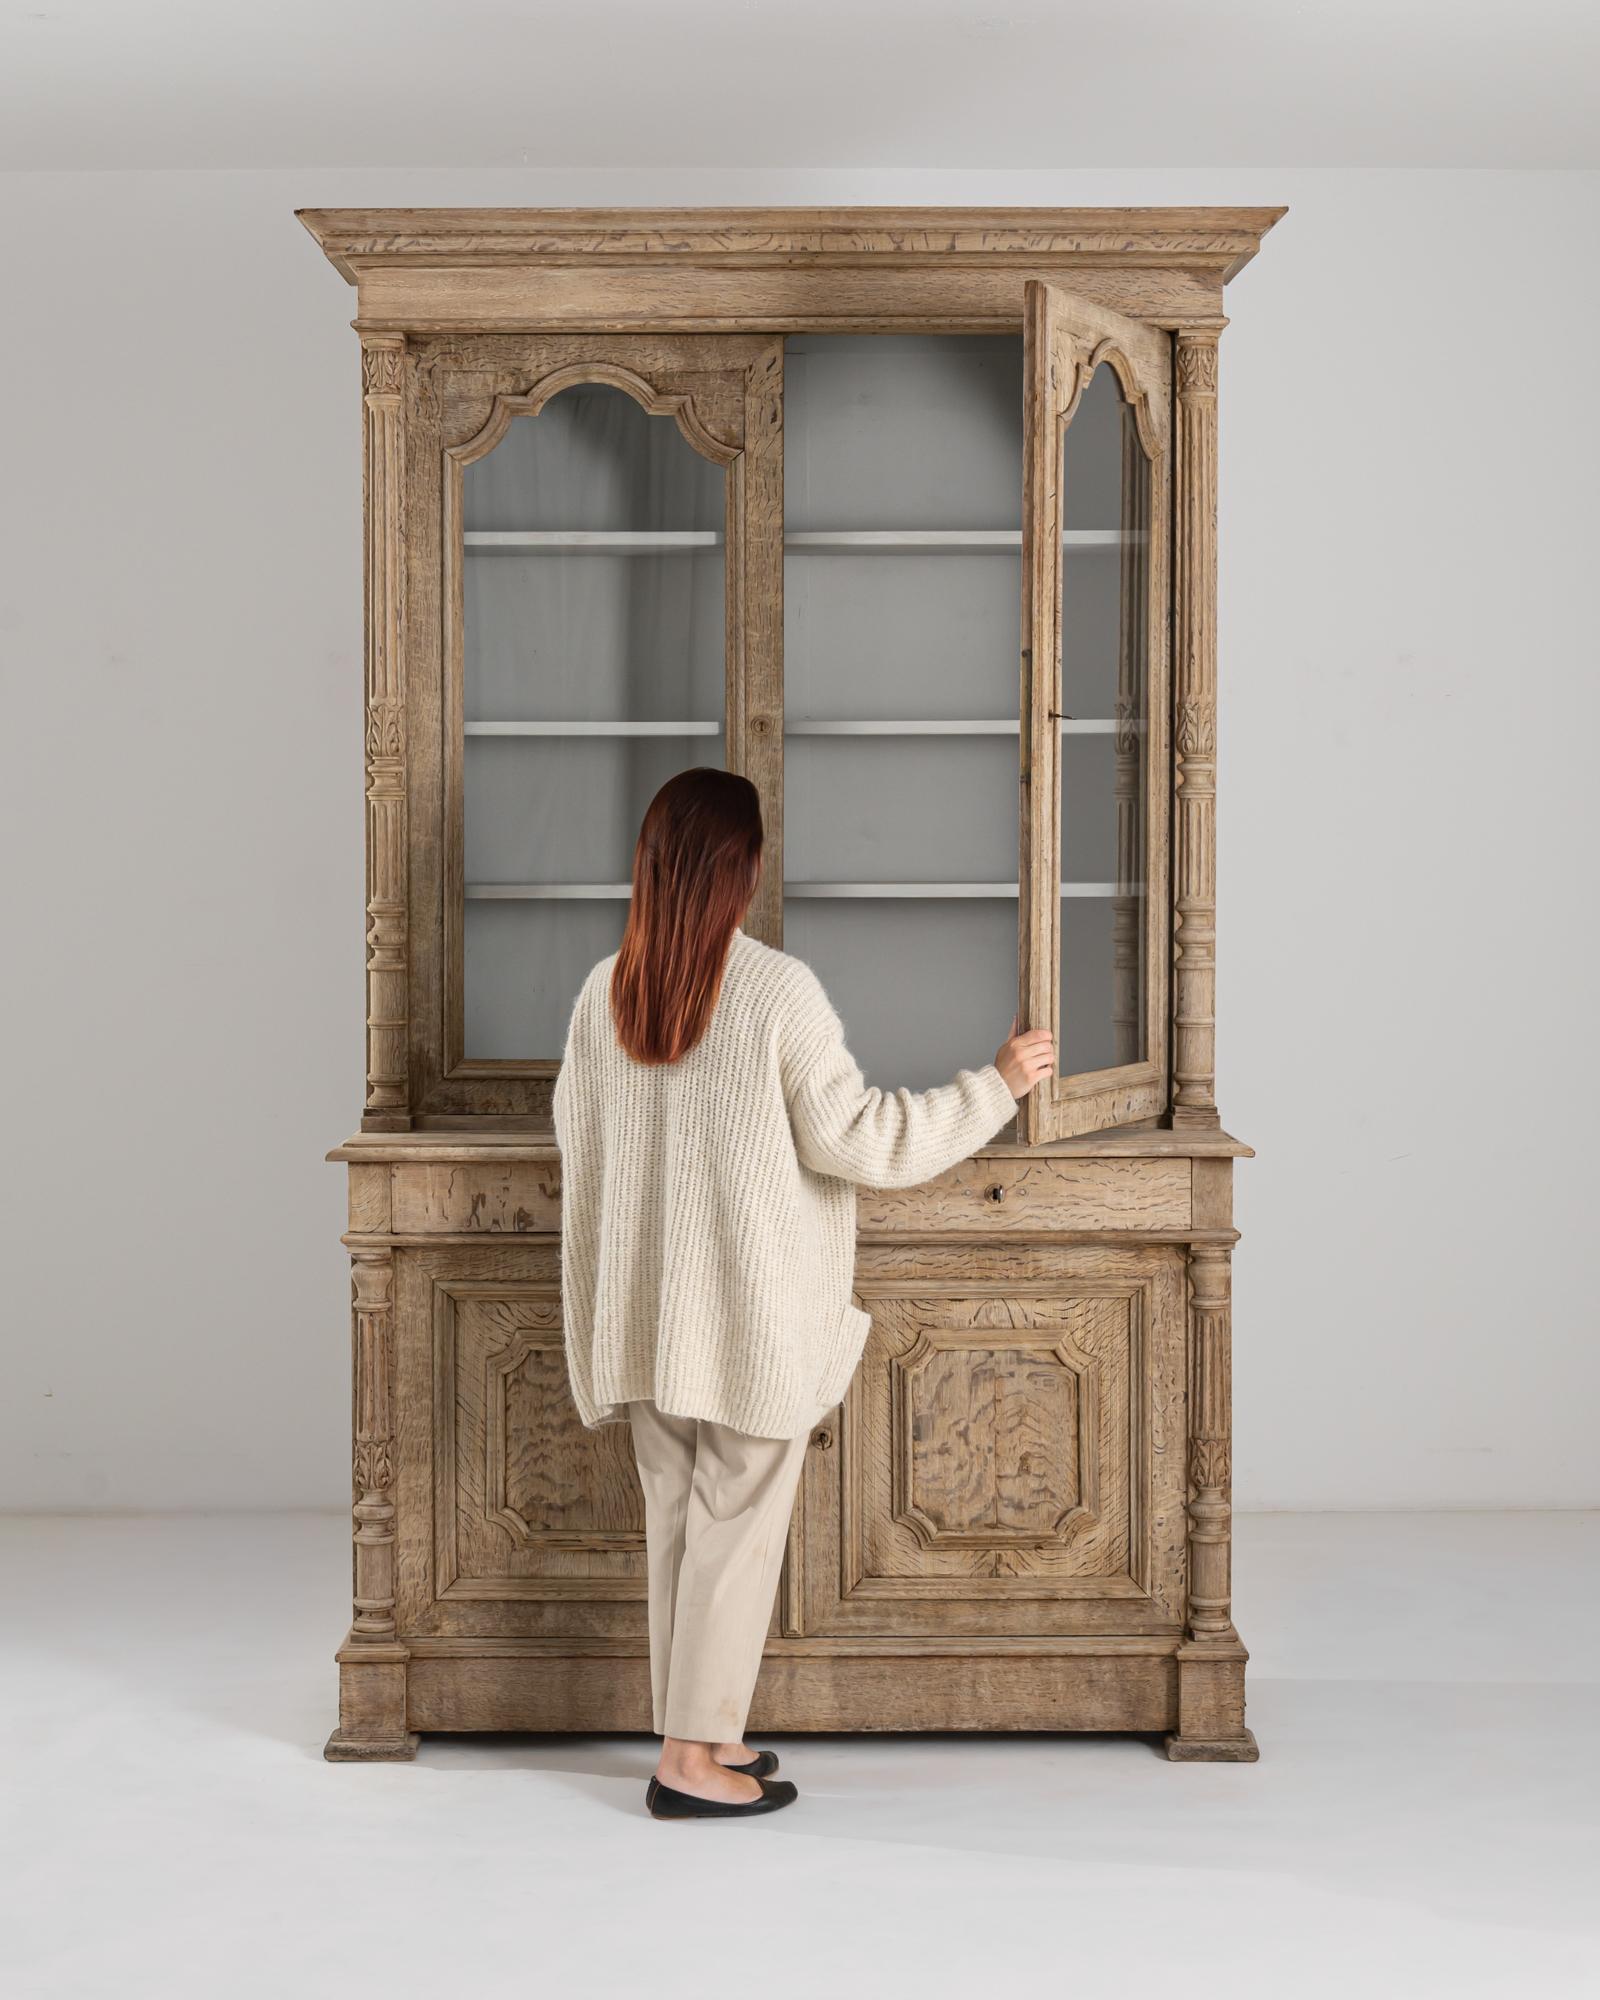 Made in the 19th century in Belgium, this oak vitrine impresses with its robust complexion and the richness of its decorative elements. The pronounced molded cornice lends a neoclassical touch, enhanced by gracefully carved arches, and columns. With